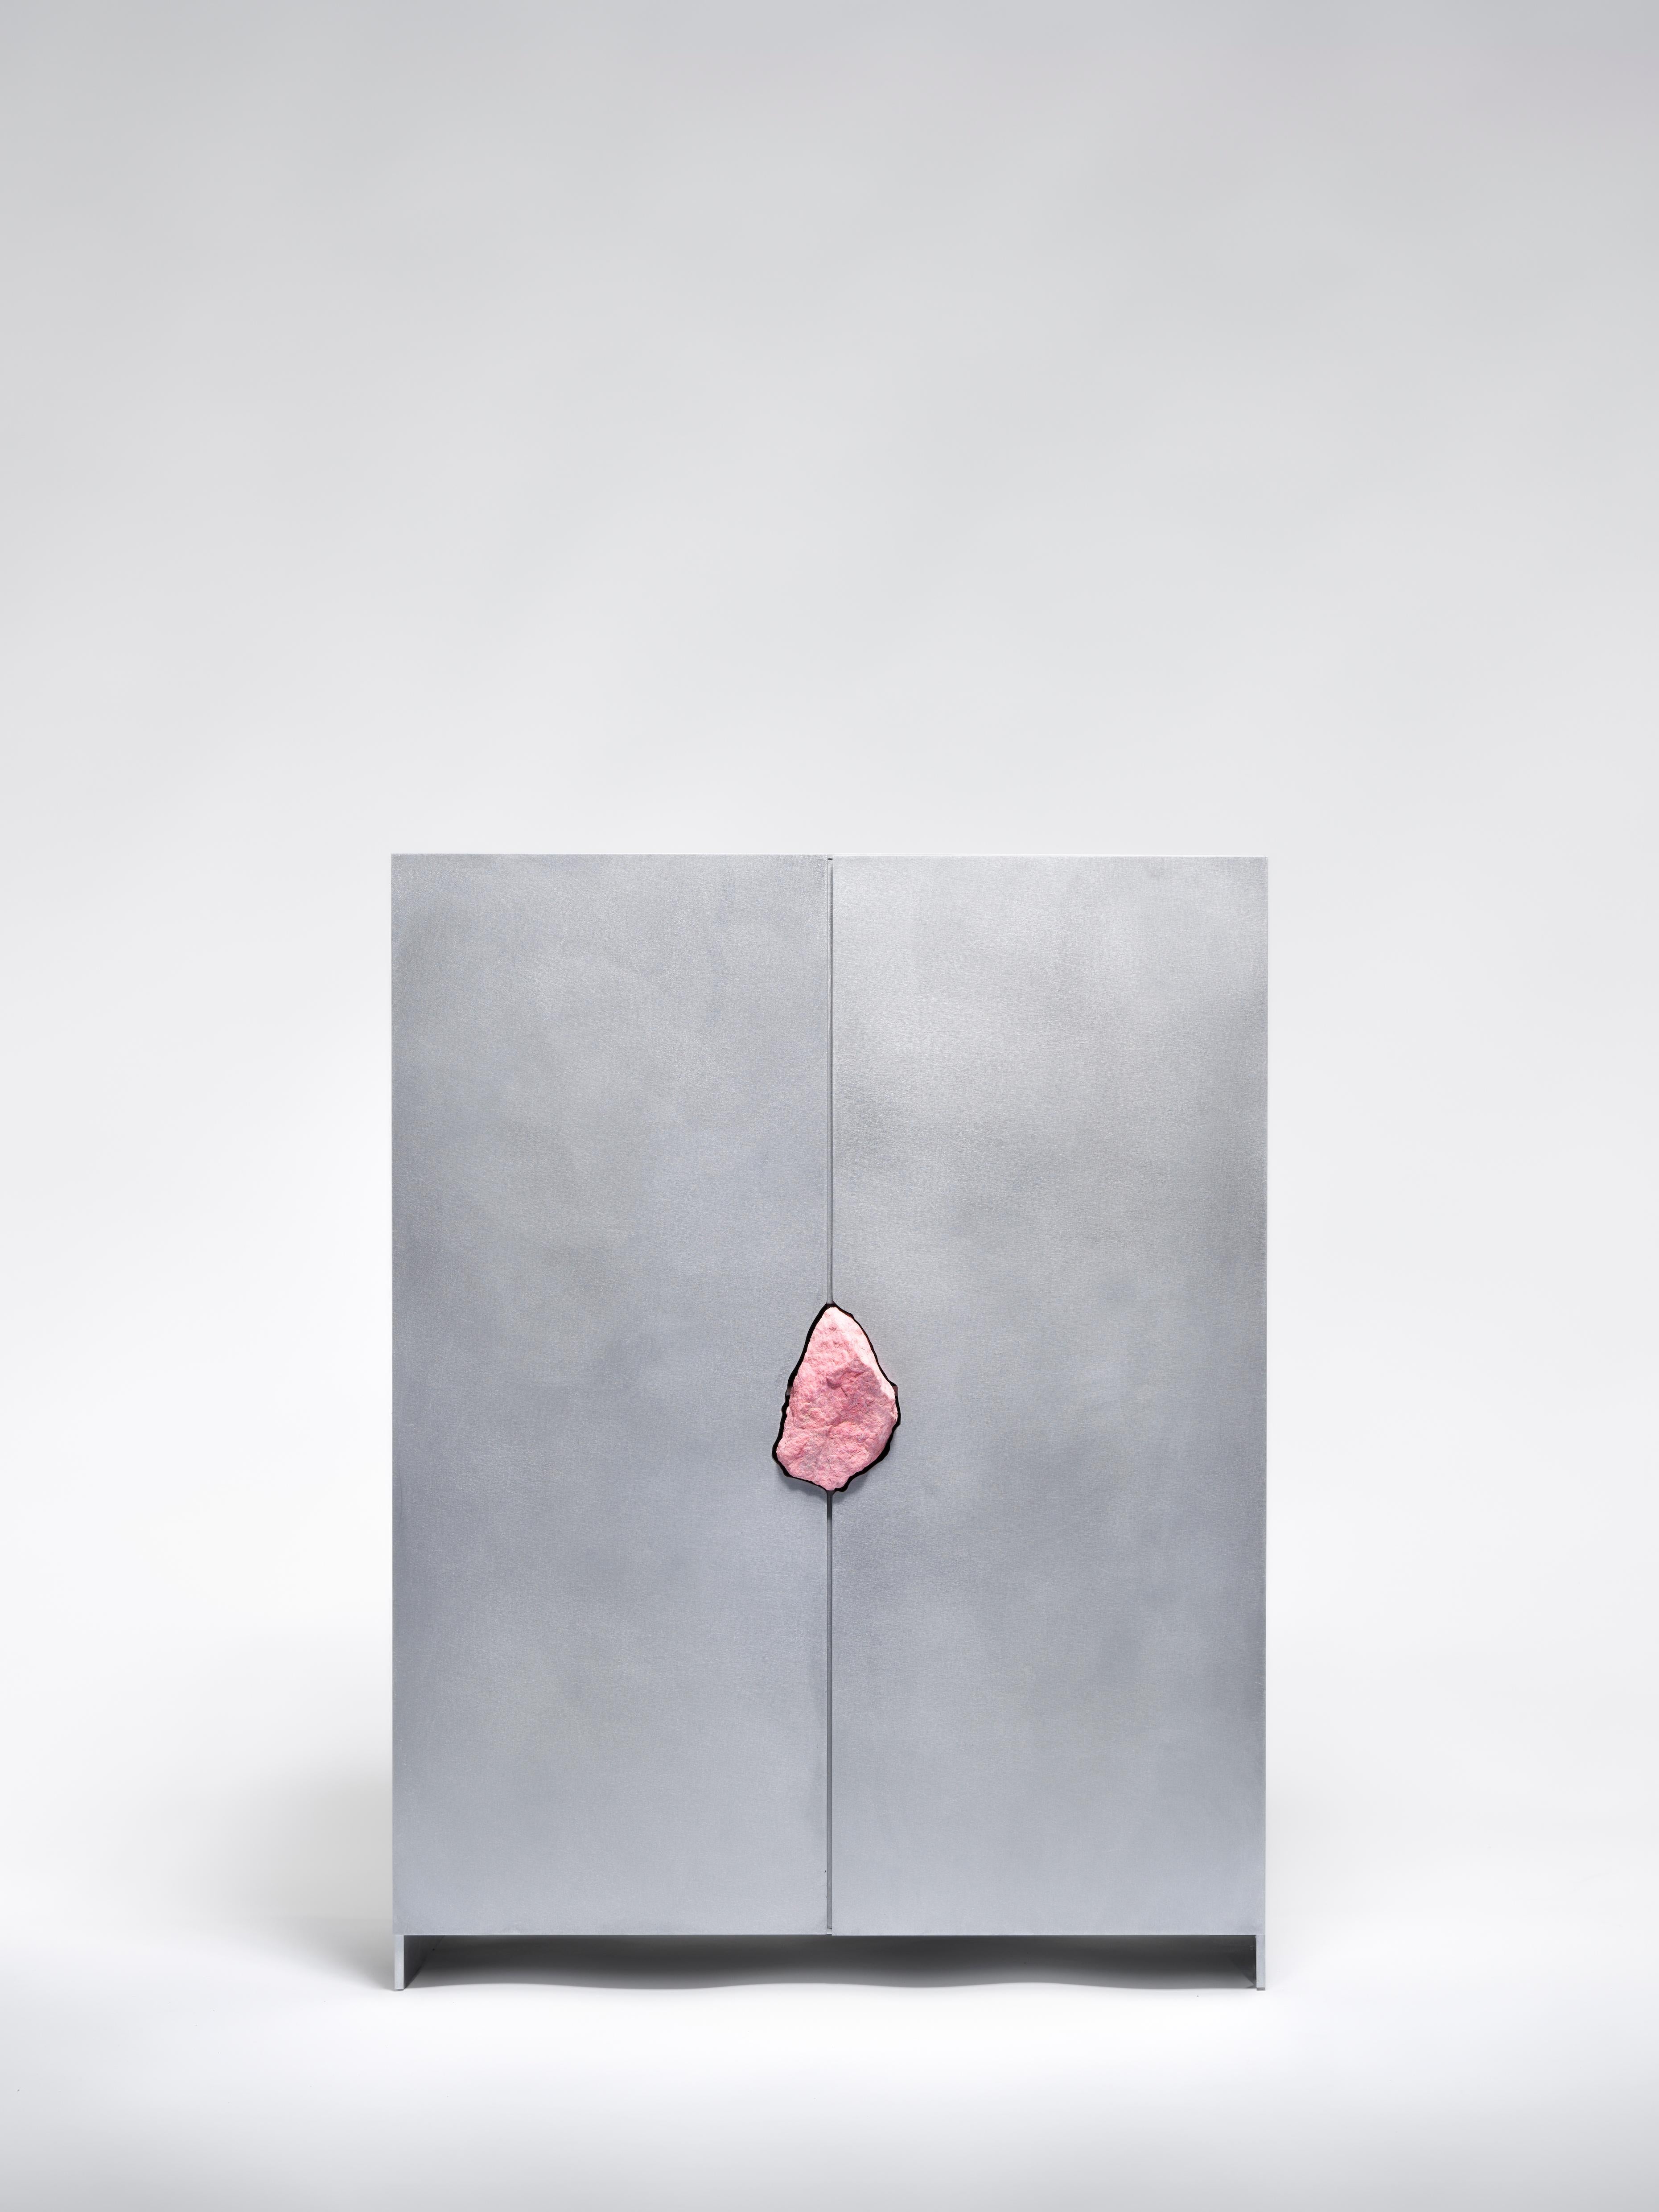 Cabinet with Thulite by Pierre De Valck.
Dimensions: W 55 x D 34 x H 70 cm.
Materials: Waxed aluminum with petrified oak
Weight: 65 kg.
Each piece is unique.

Pierre De Valck (1991) born in Brussels, is a Ghent-based designer with a childhood